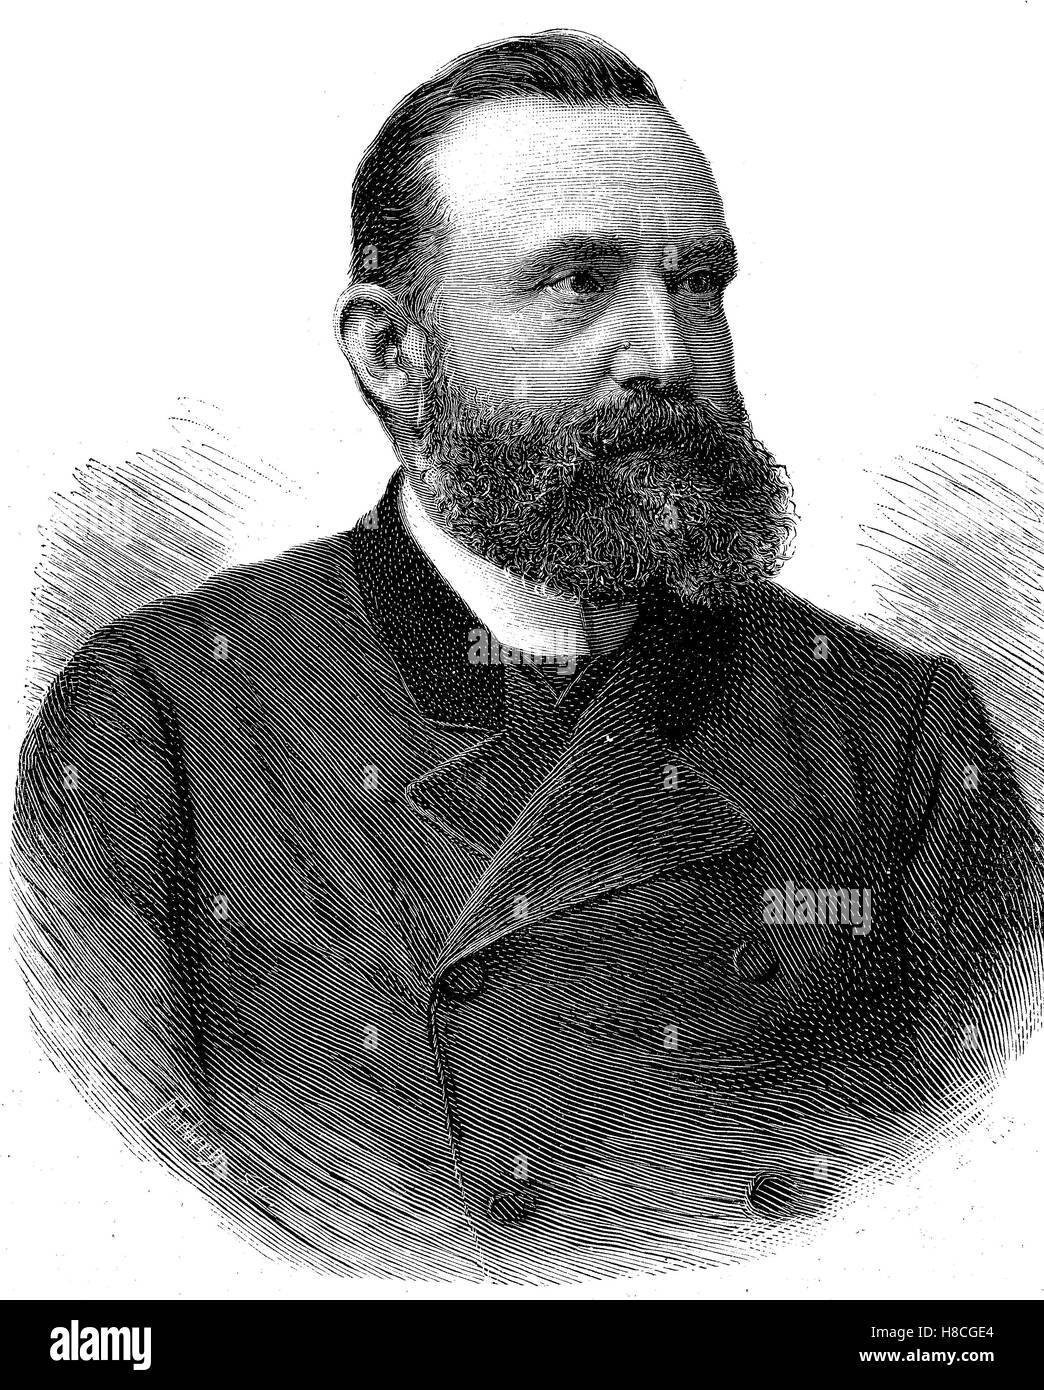 Walter Hauser, May 1, 1837, Waedenswil - October 22, 1902, was a Swiss politician and member of the Swiss Federal Council , Woodcut from 1892 Stock Photo